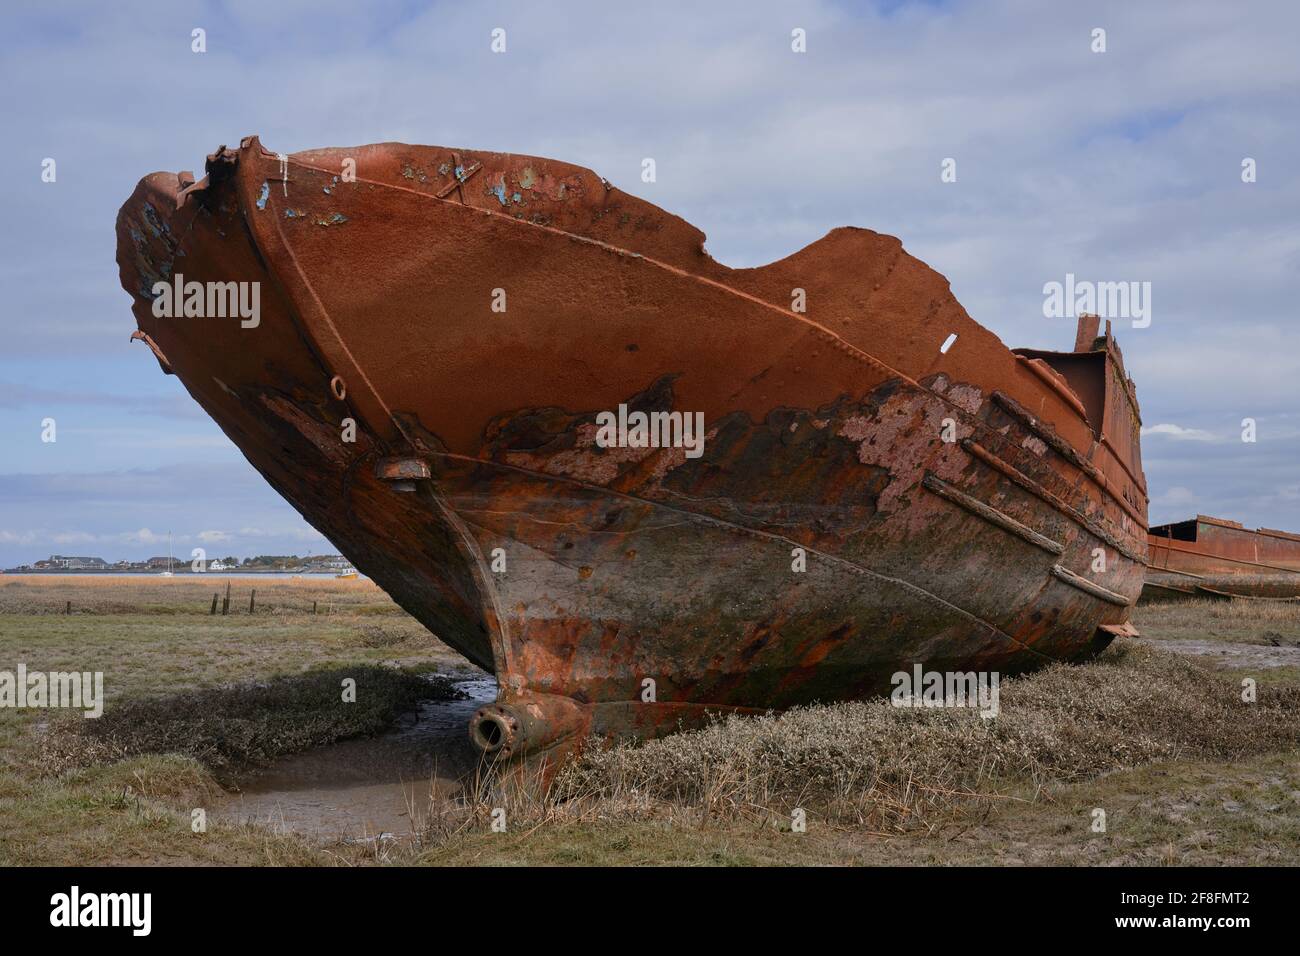 The remanence of what once was a brand new and ship shape ship now rest in silence. Another picture from my ‘sands of time’ collection Stock Photo